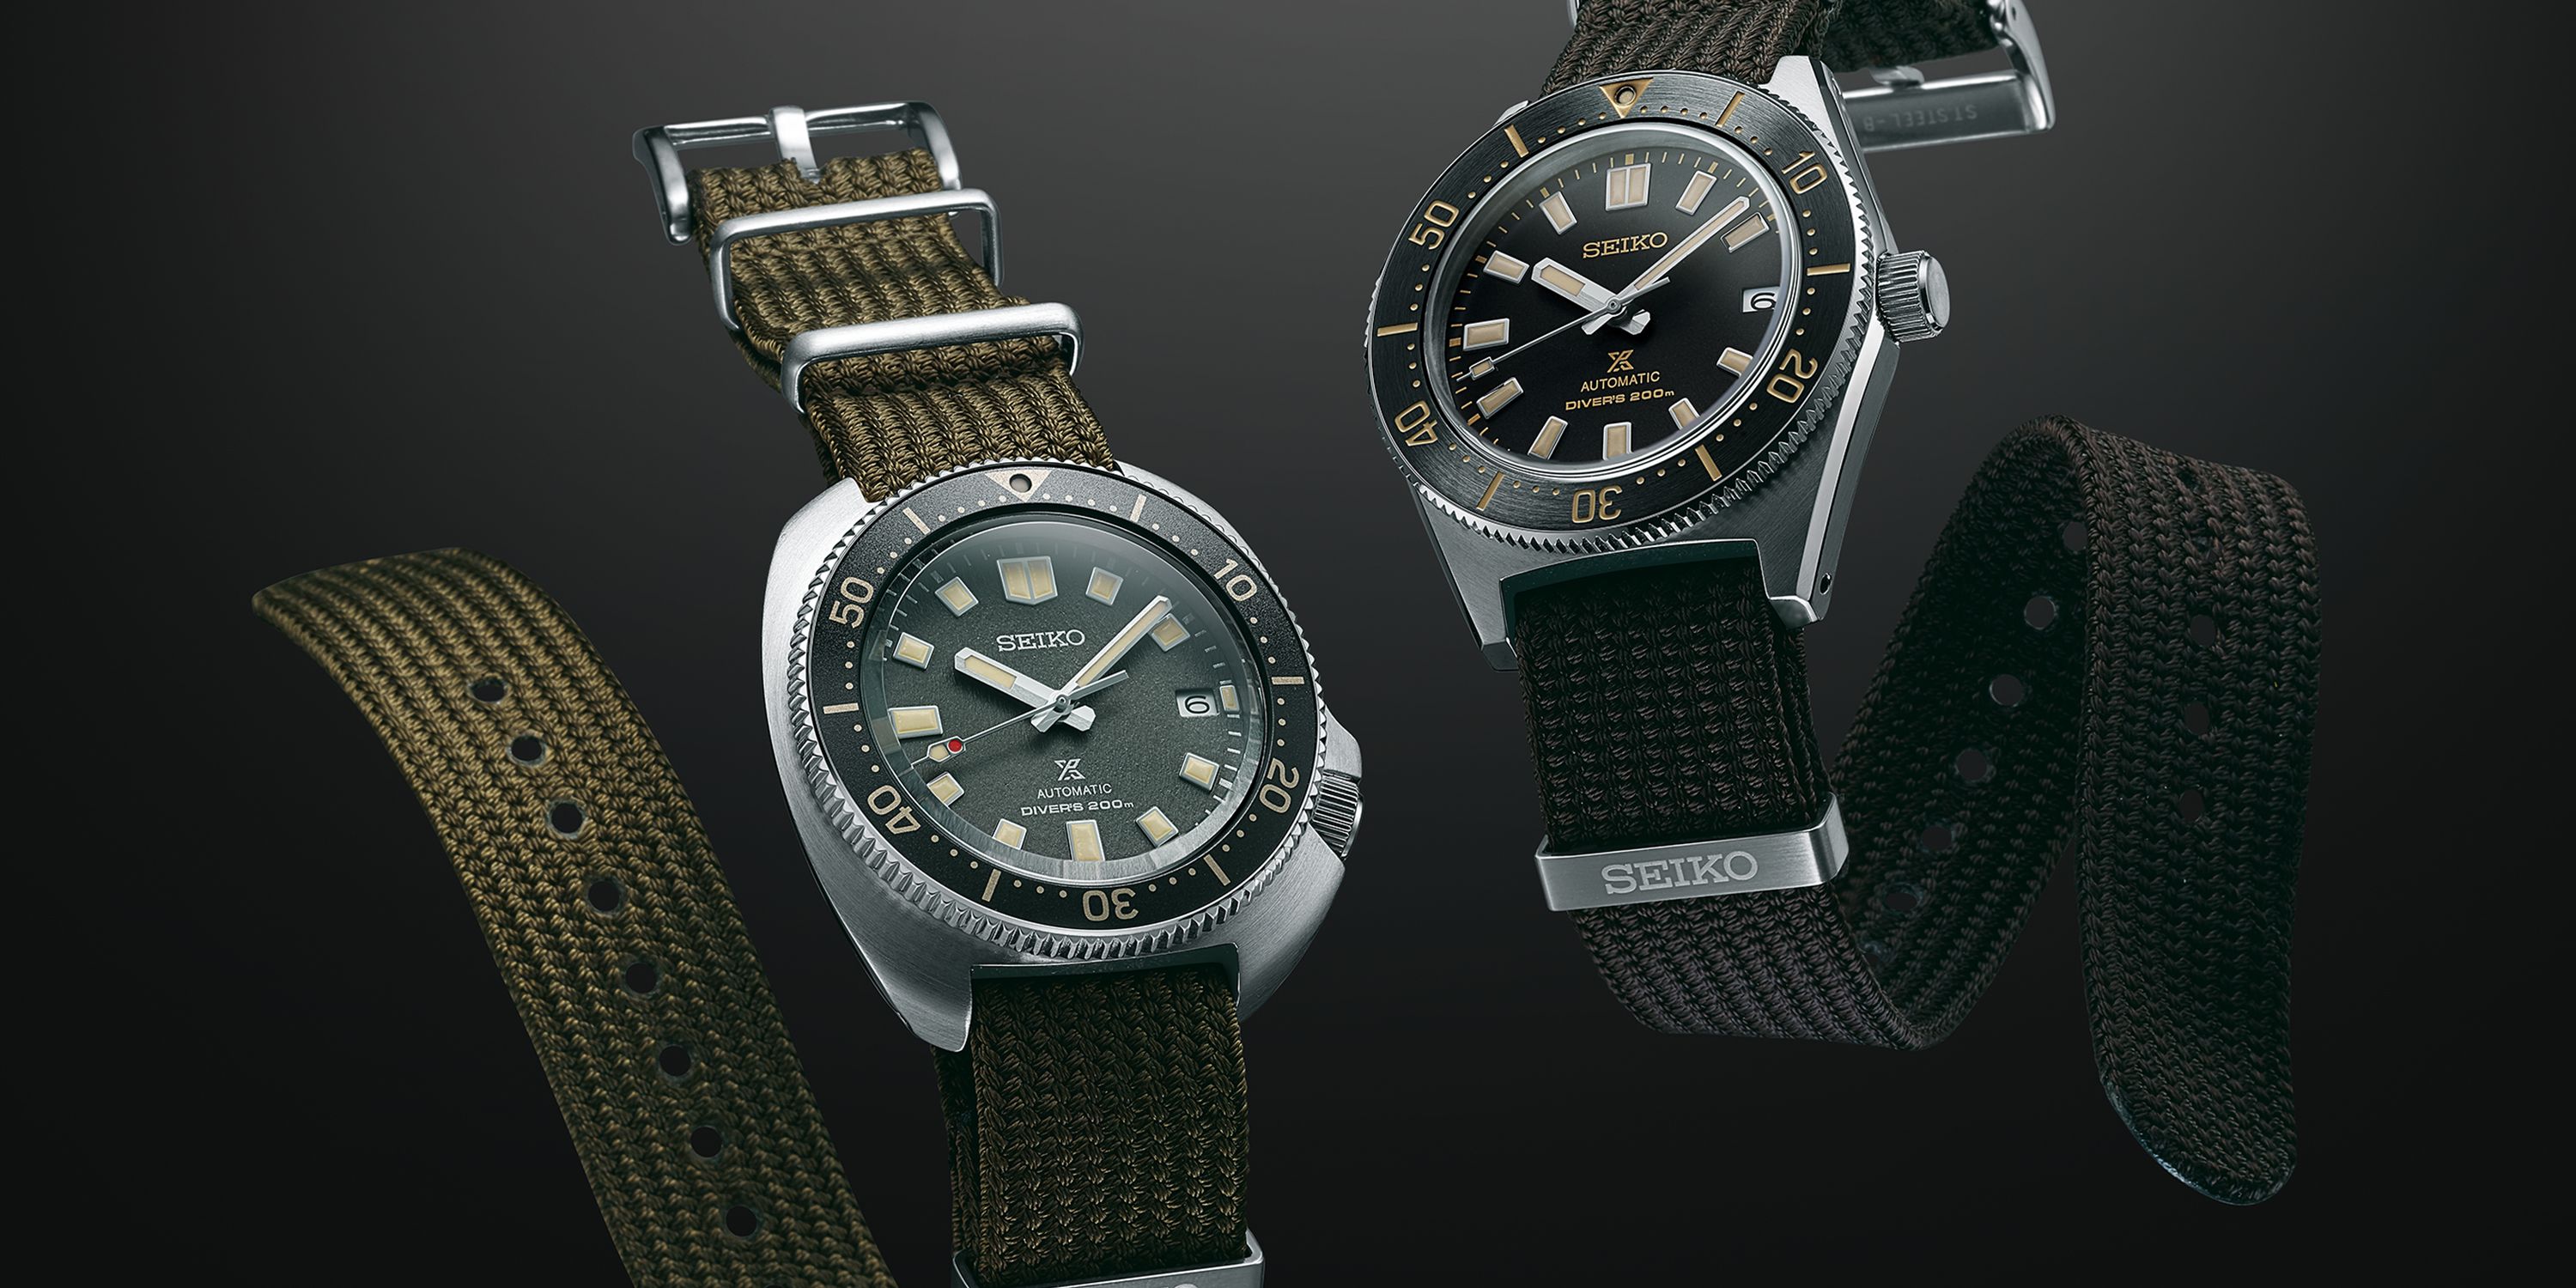 Seiko Dive Watches Look Stellar With New Japanese Textile Straps